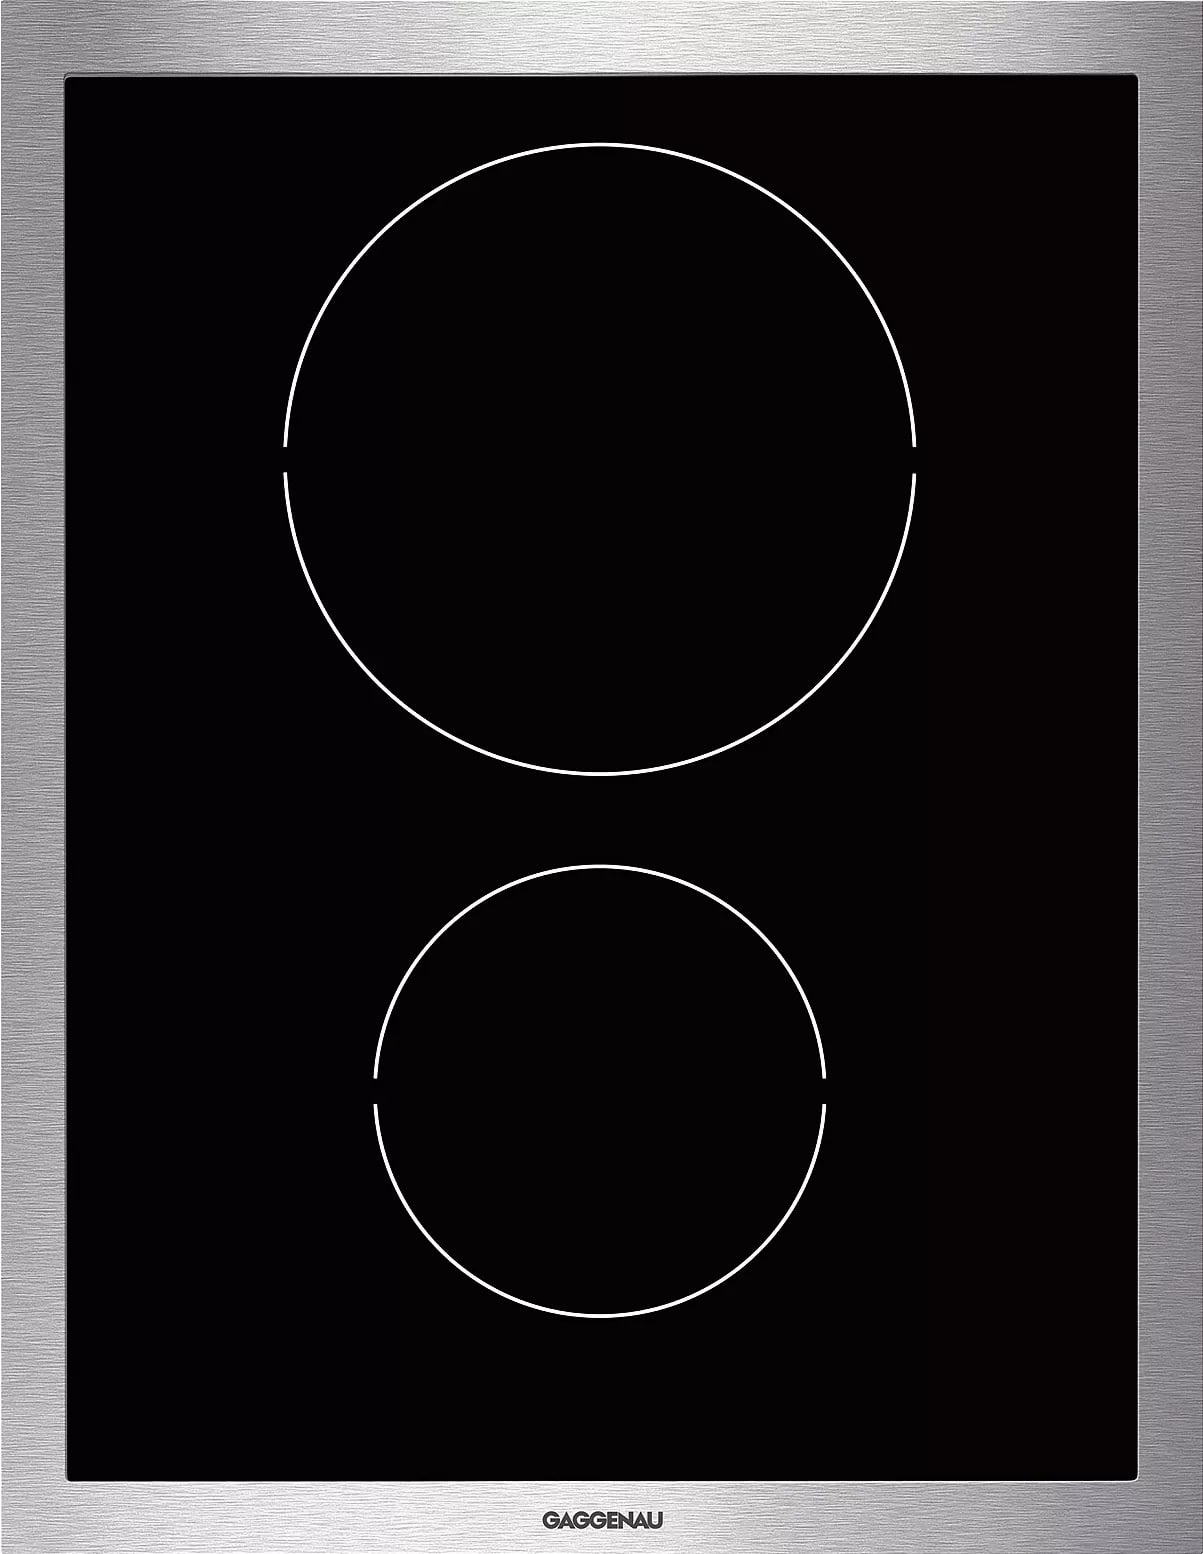 Gaggenau - 14.96 inch wide Induction Cooktop in Stainless - VI424610